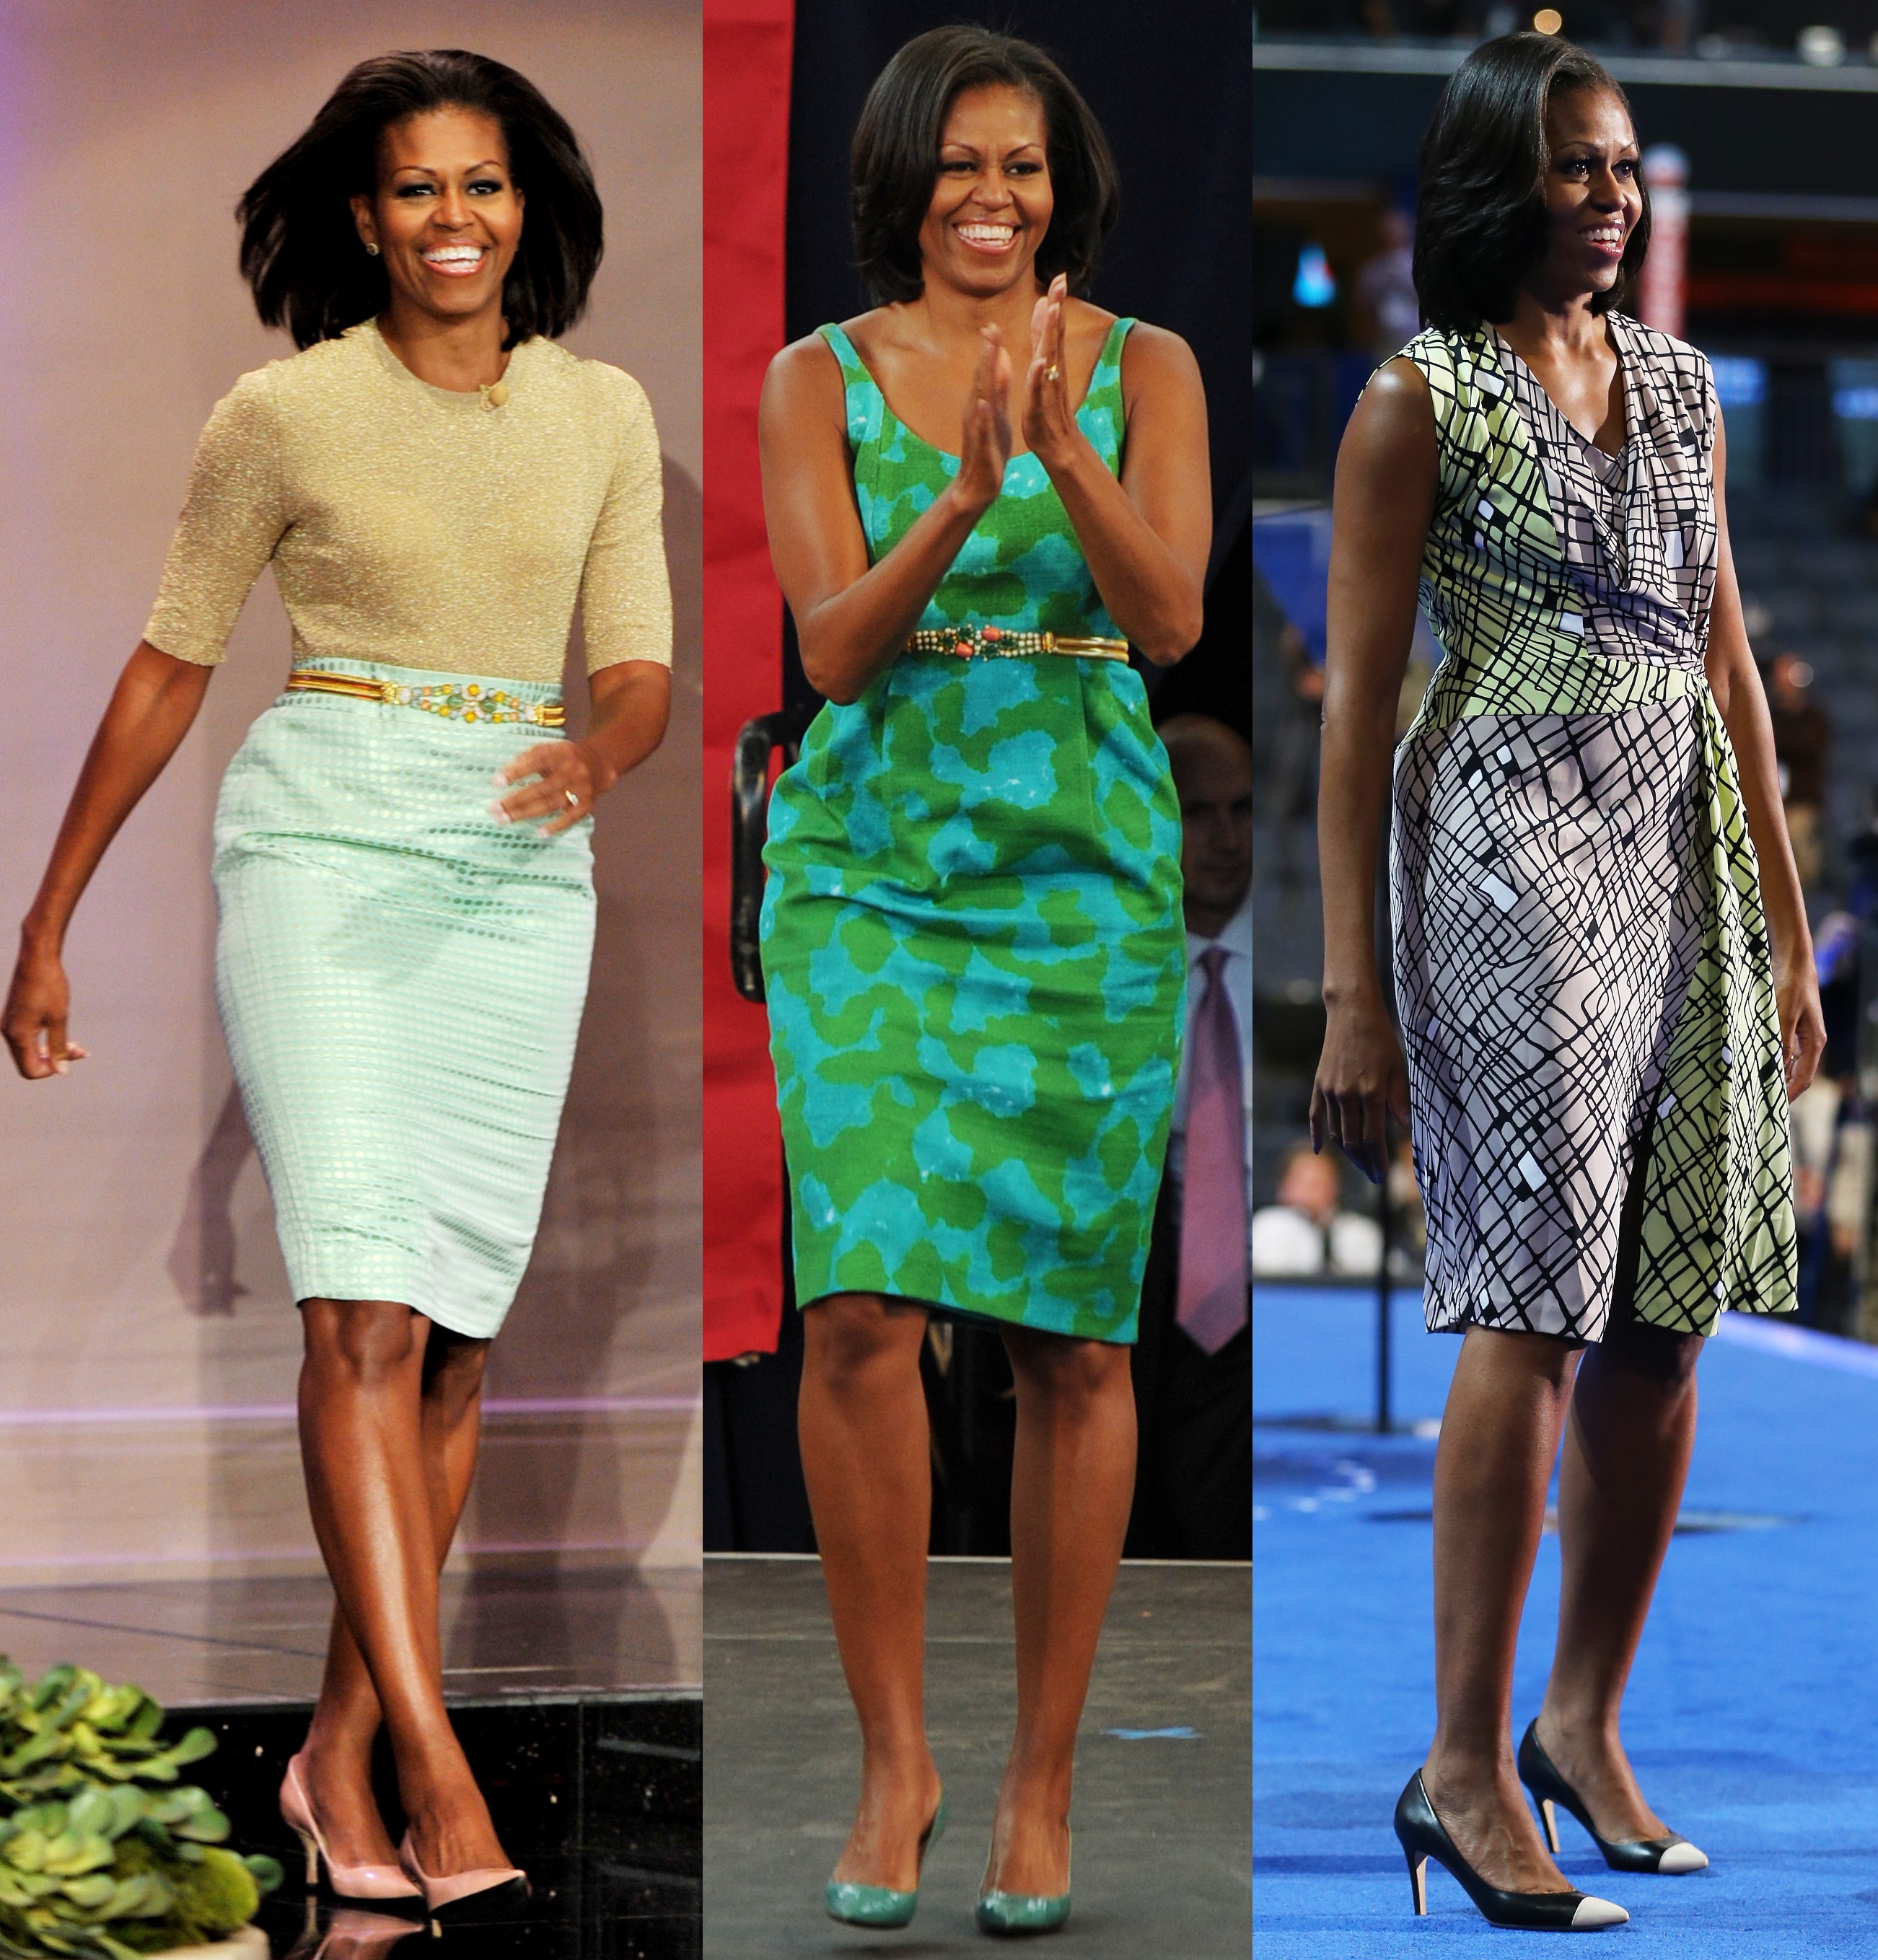 The Best Fashion Moments in First Lady History - The Best Dressed First  Ladies